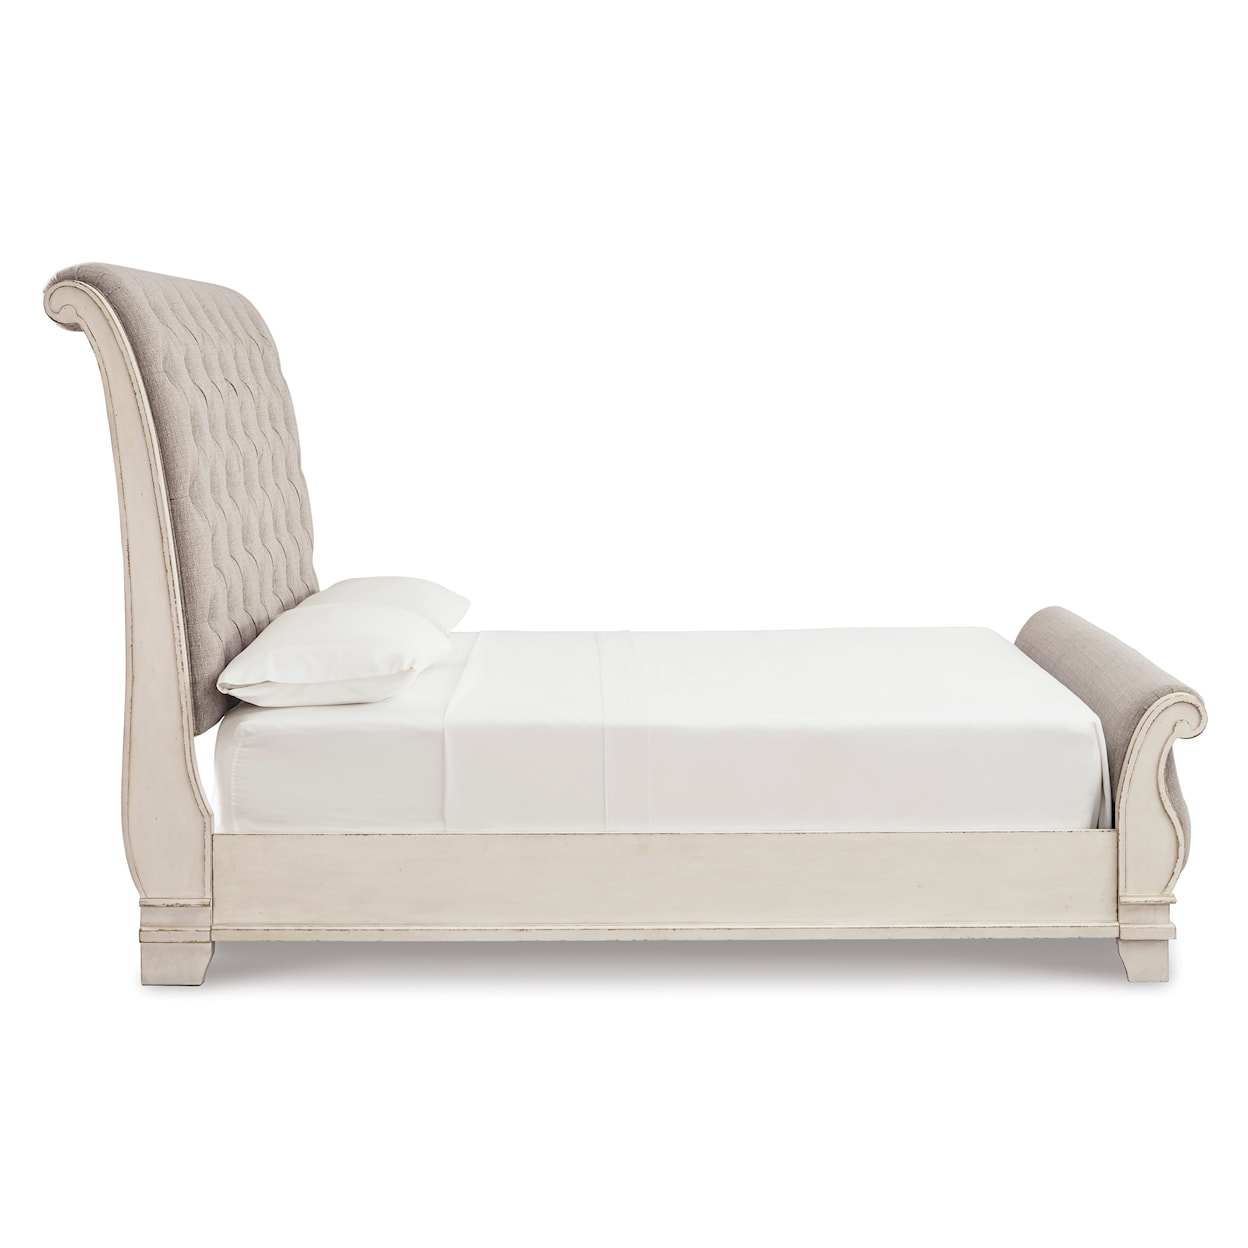 Signature Design 15123 King Upholstered Sleigh Bed